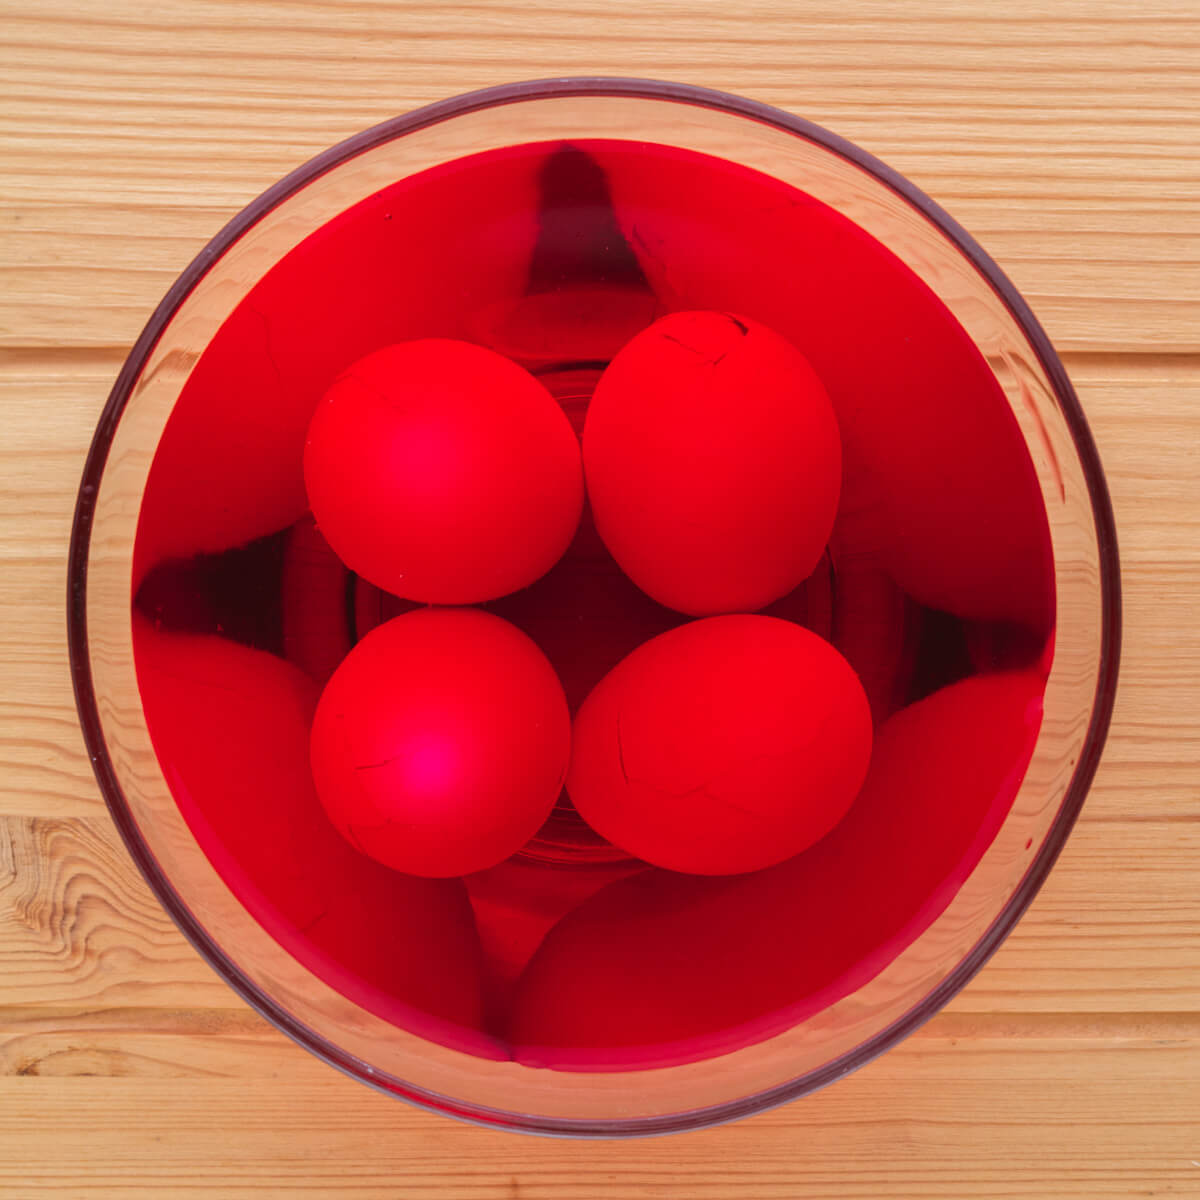 Cracked eggs in a bowl of red dye.